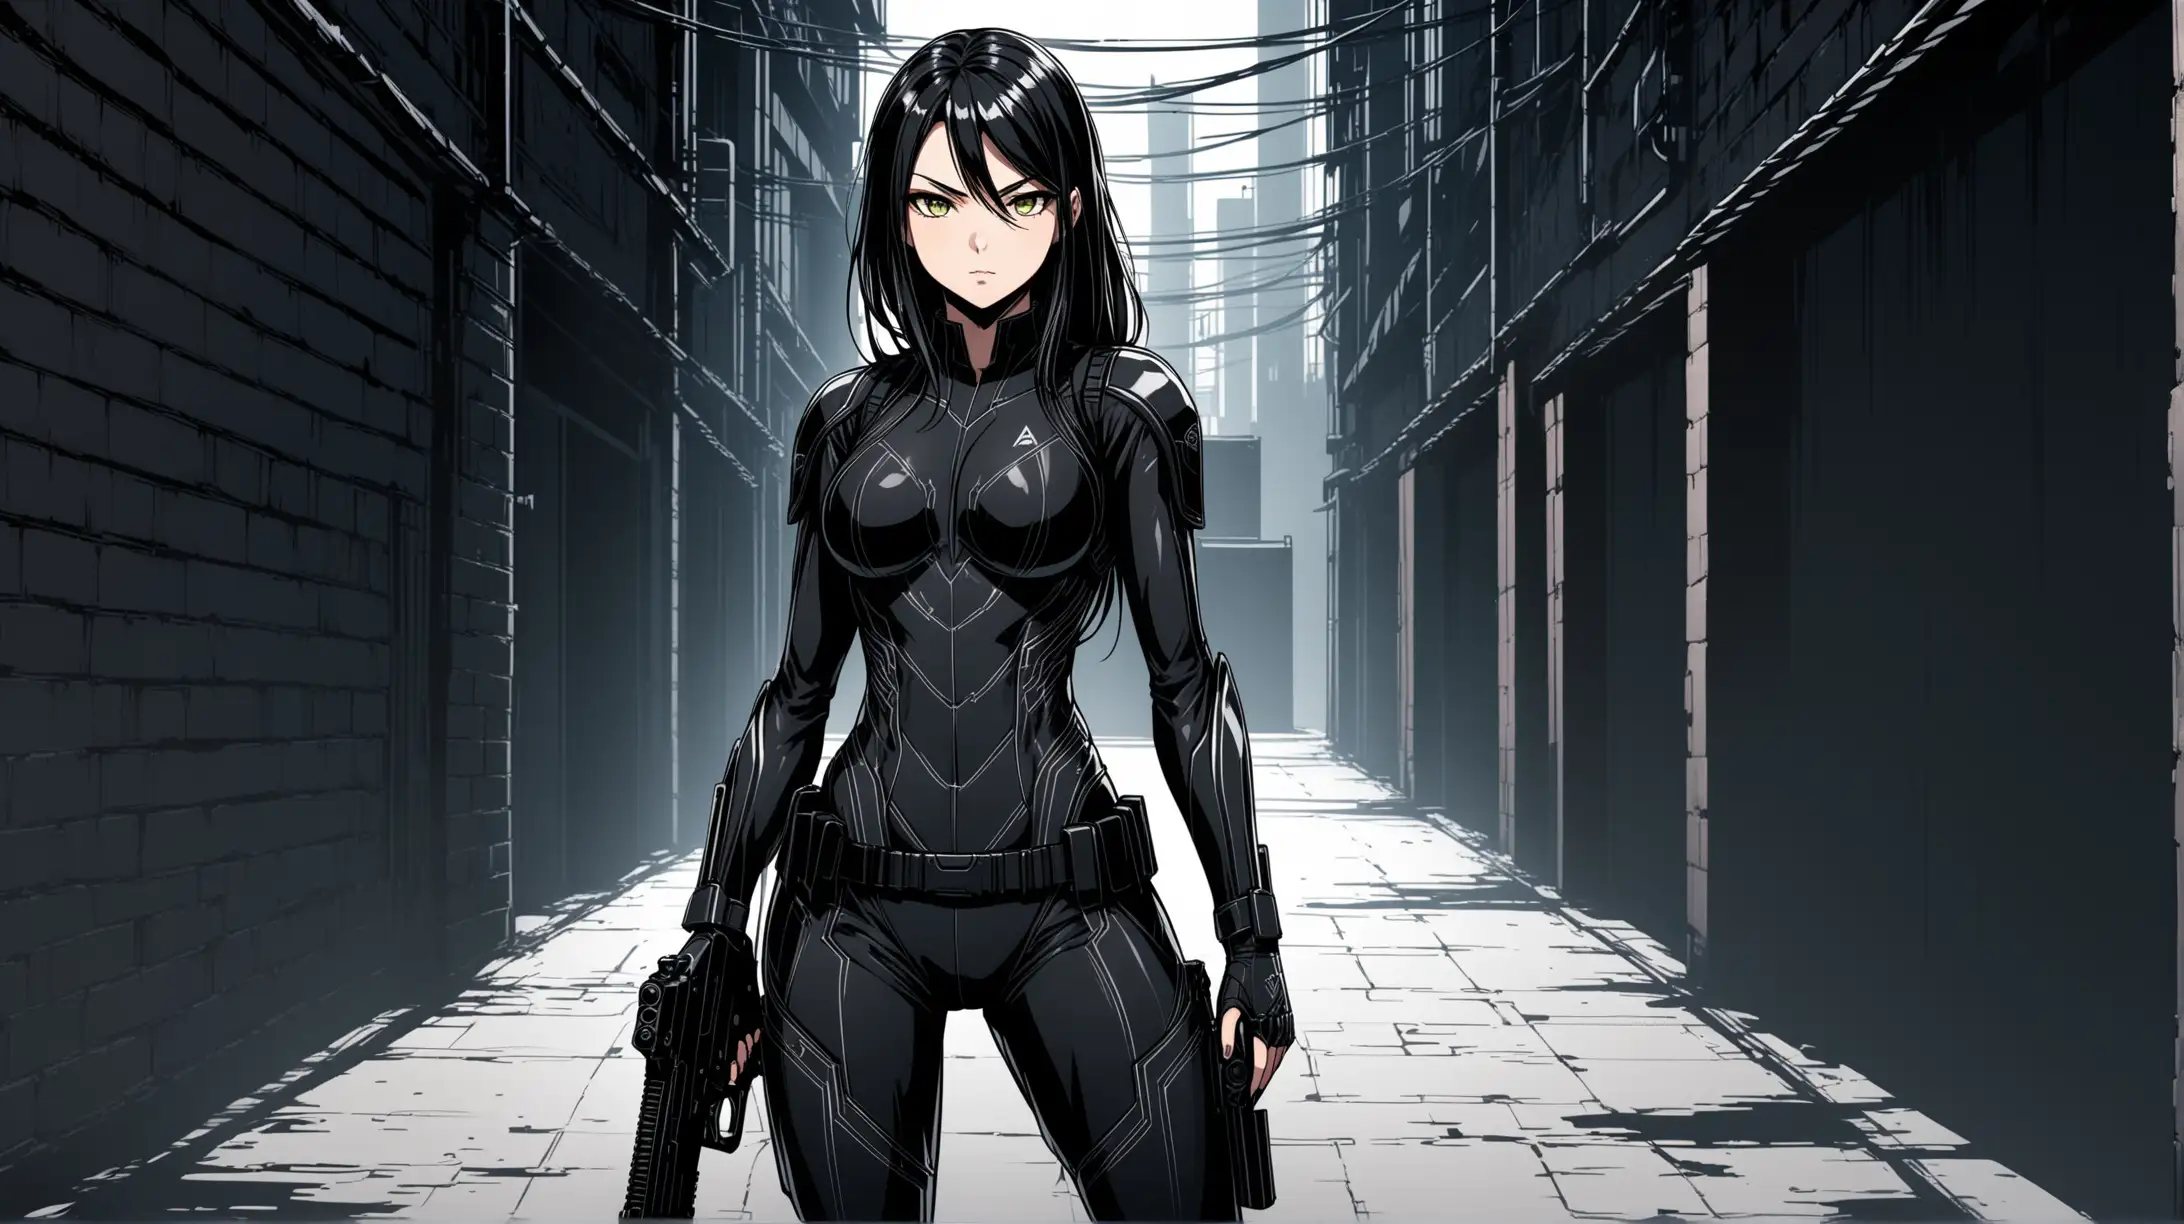 Create an anime-style female assassin character with a sleek black color theme. She has long, flowing black hair and piercing, intense eyes that are a shade of deep charcoal. Her outfit is a form-fitting black stealth suit, adorned with subtle black armor plating for both protection and agility. She wields black dual pistols with sleek, futuristic designs, each engraved with intricate black patterns that give off a subtle glow in low light. Her stance is confident and poised, one hand gripping a pistol while the other rests casually by her side, ready to draw her weapon at a moment's notice. The background is a dark urban alleyway, with shadows enveloping her and emphasizing her stealthy nature.